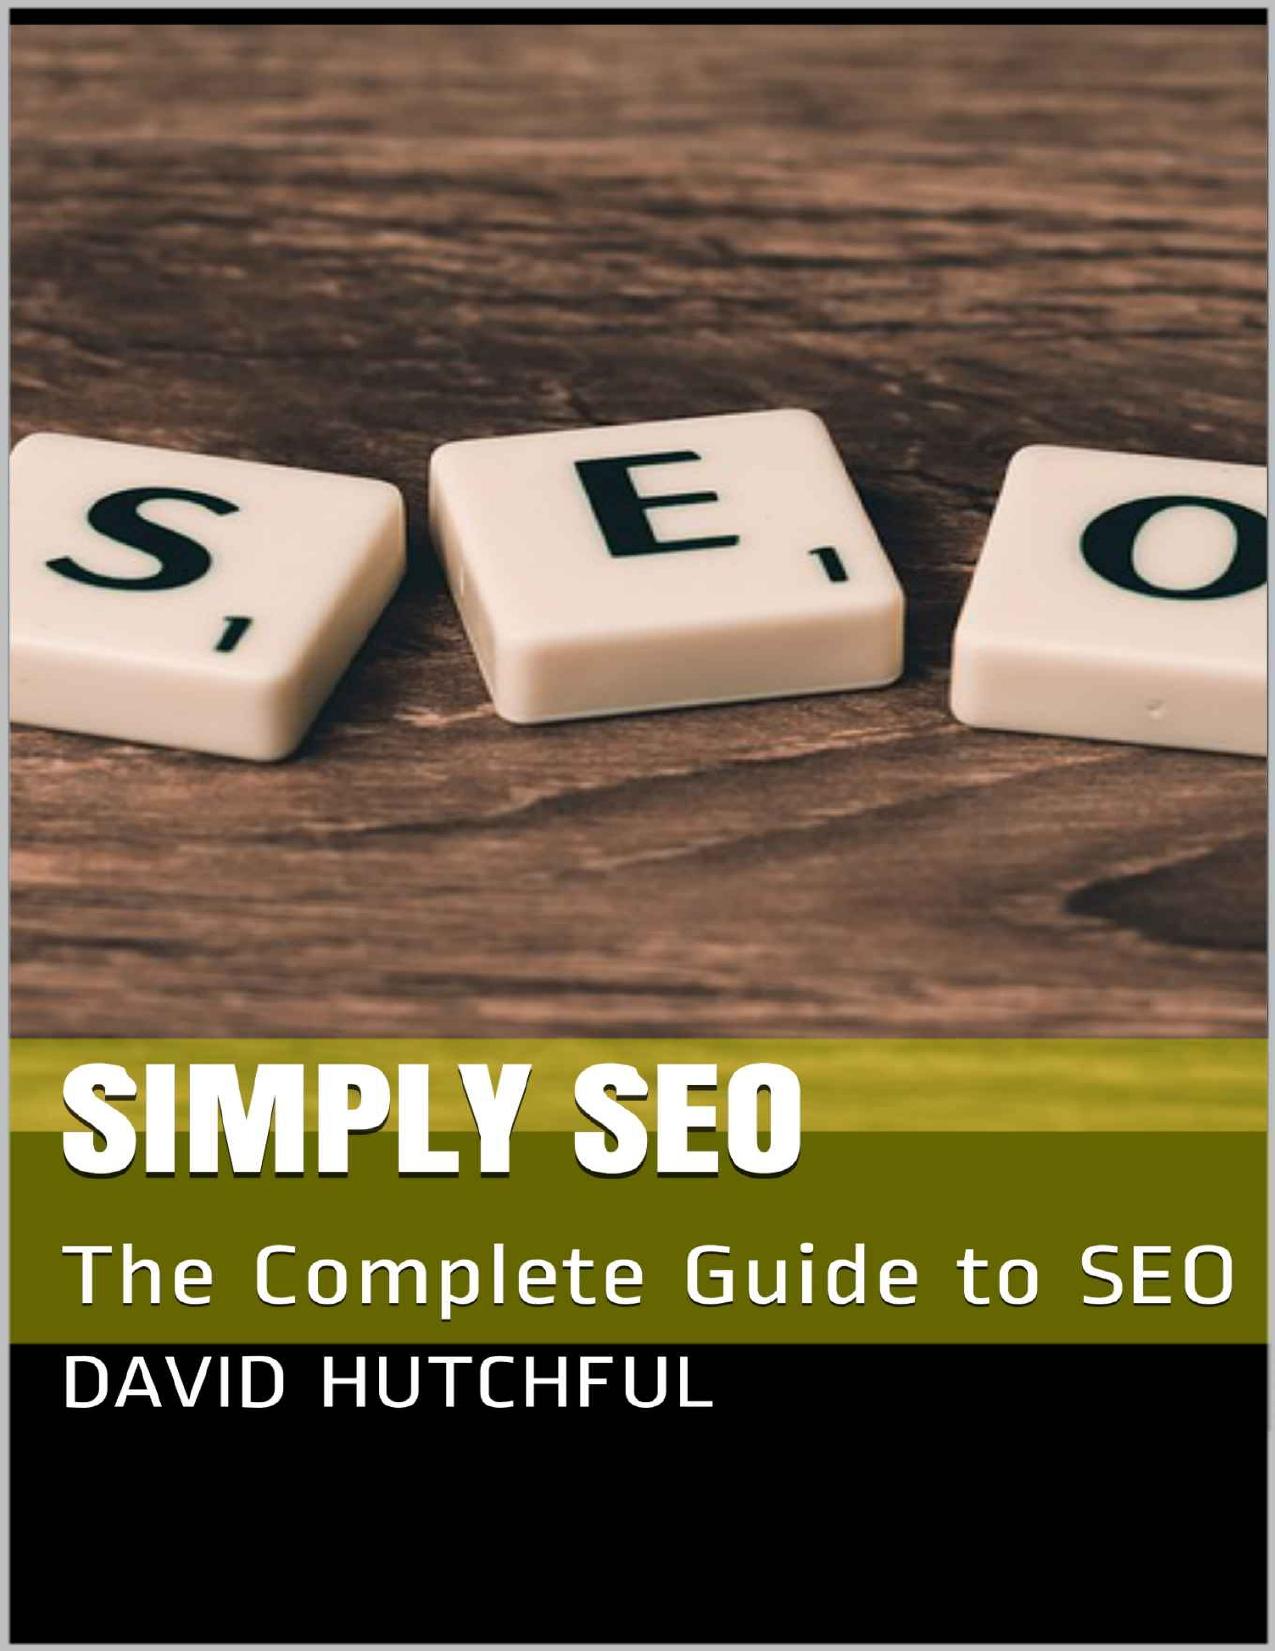 Simply SEO: The Complete Guide to SEO by David Hutchful